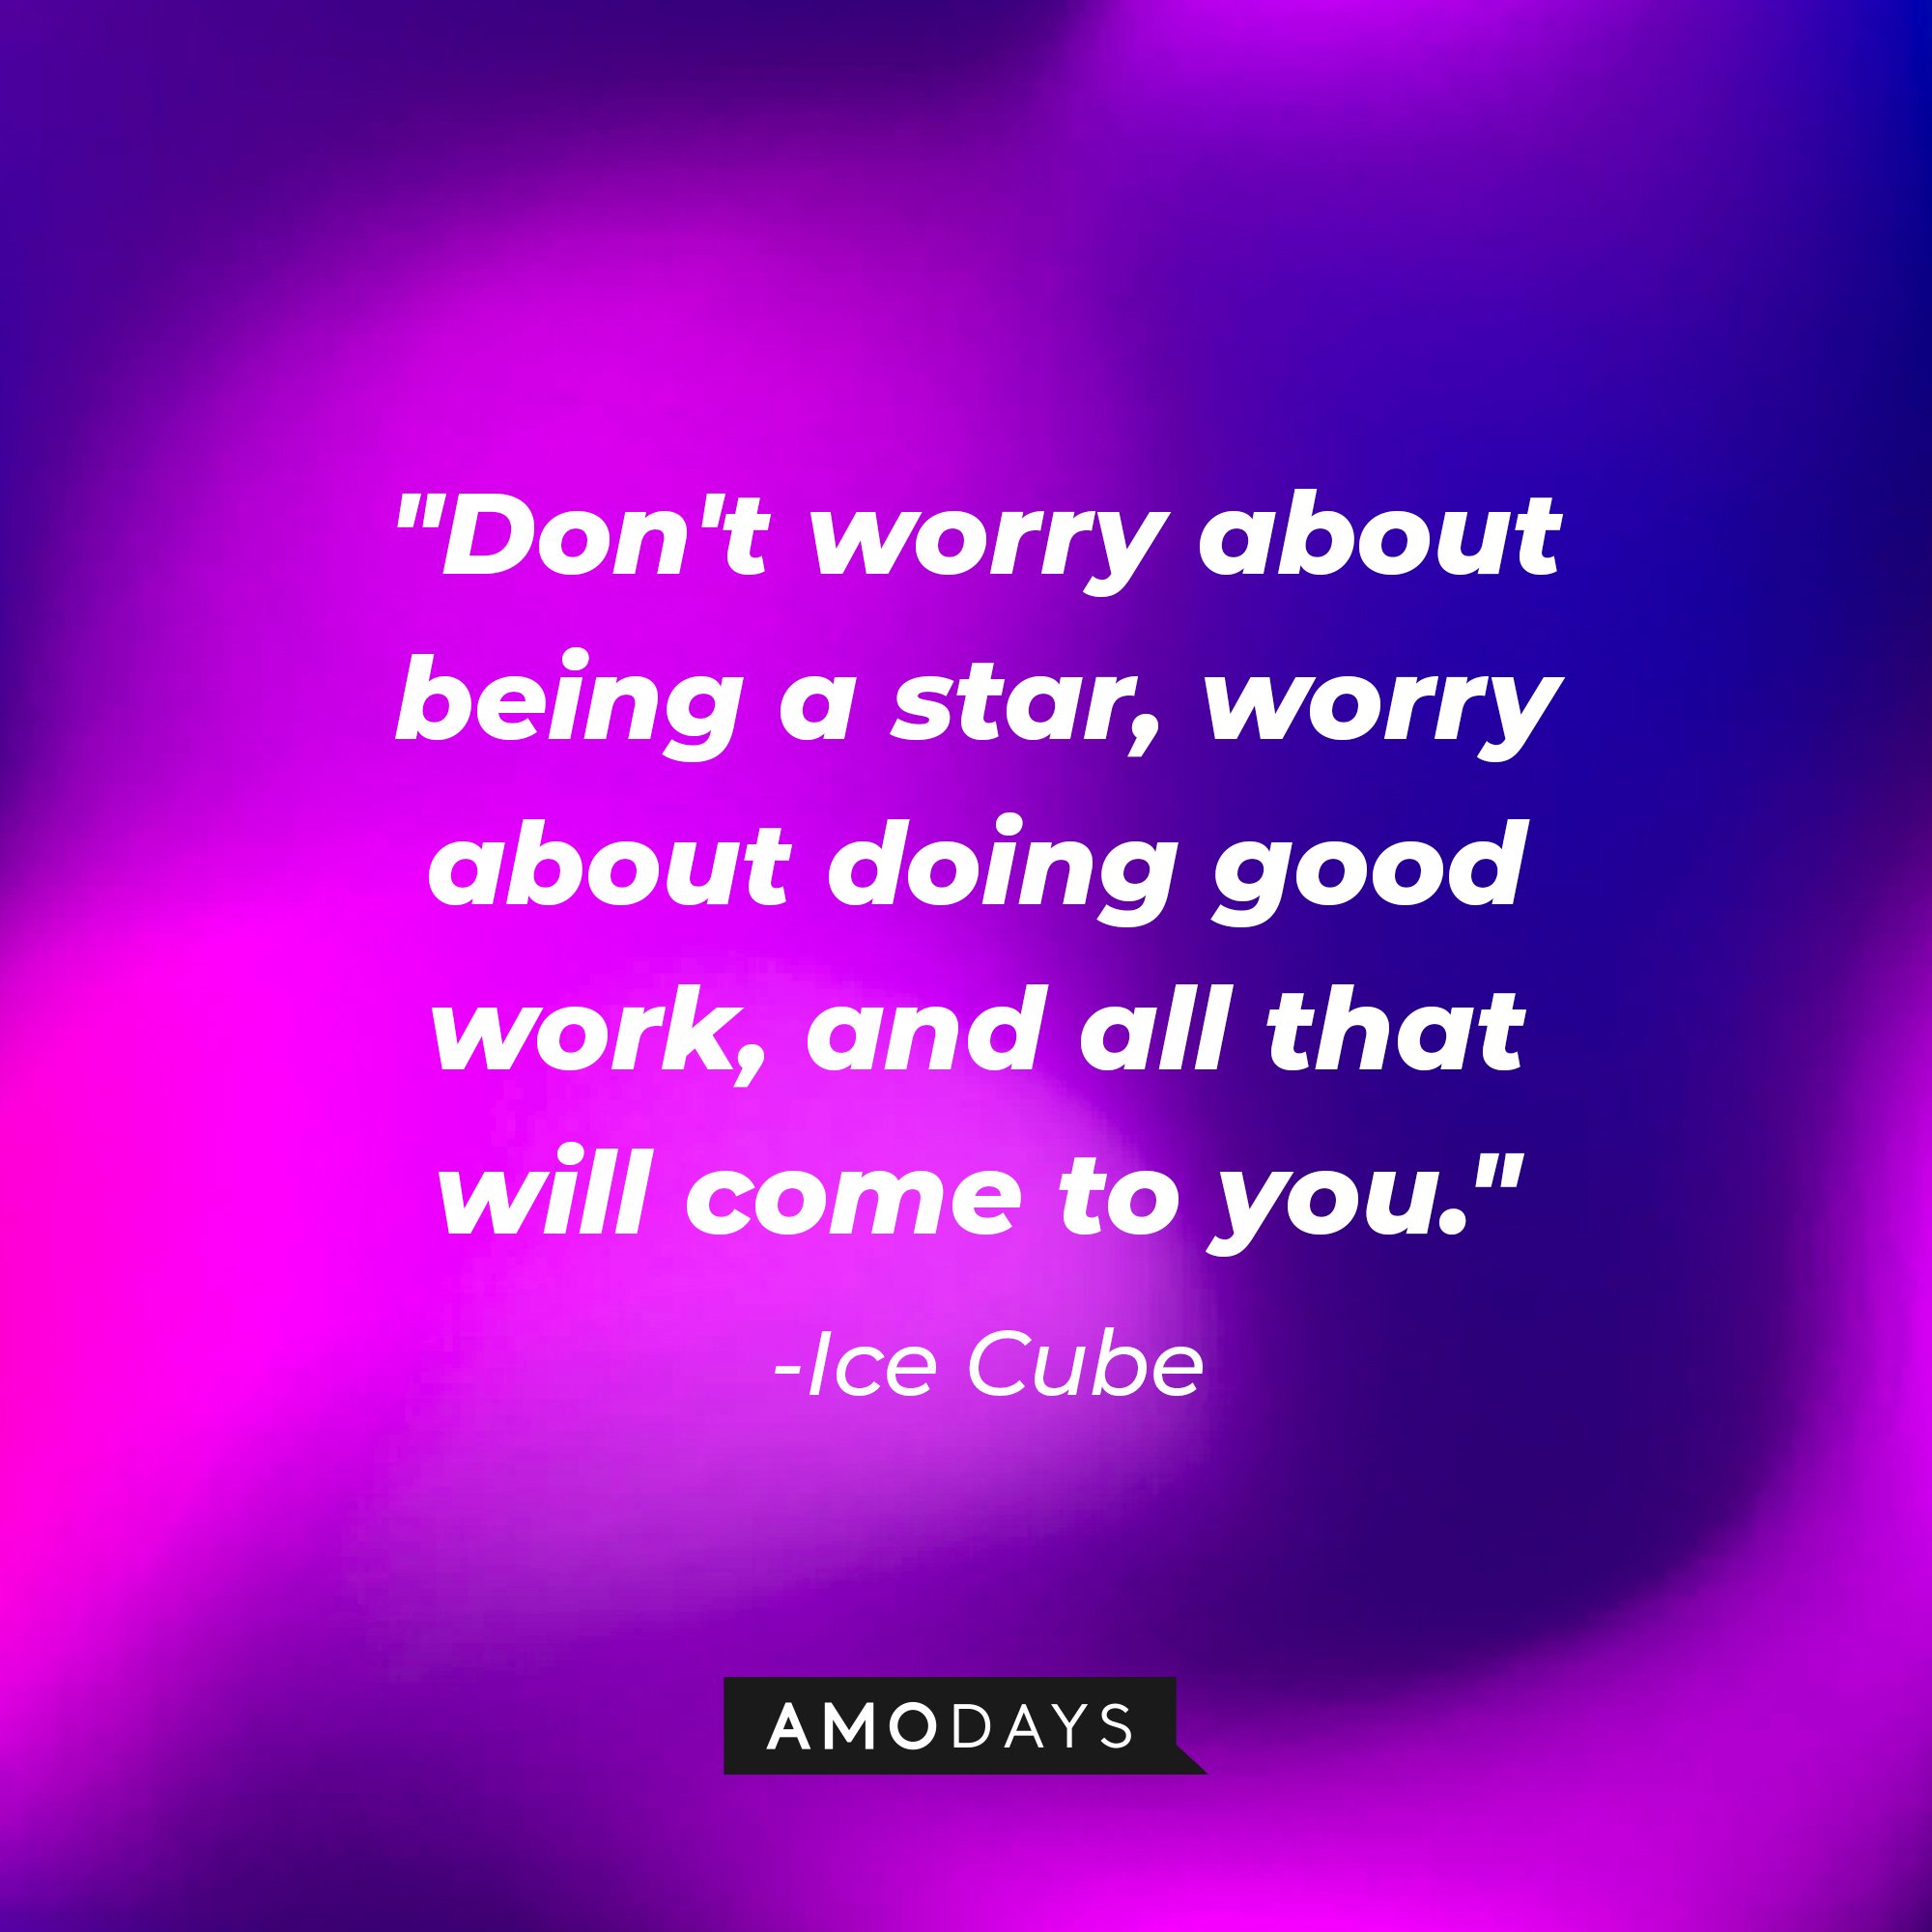 Ice Cube's quote: "Don't worry about being a star, worry about doing good work, and all that will come to you." — Ice Cube | Image: AmoDays